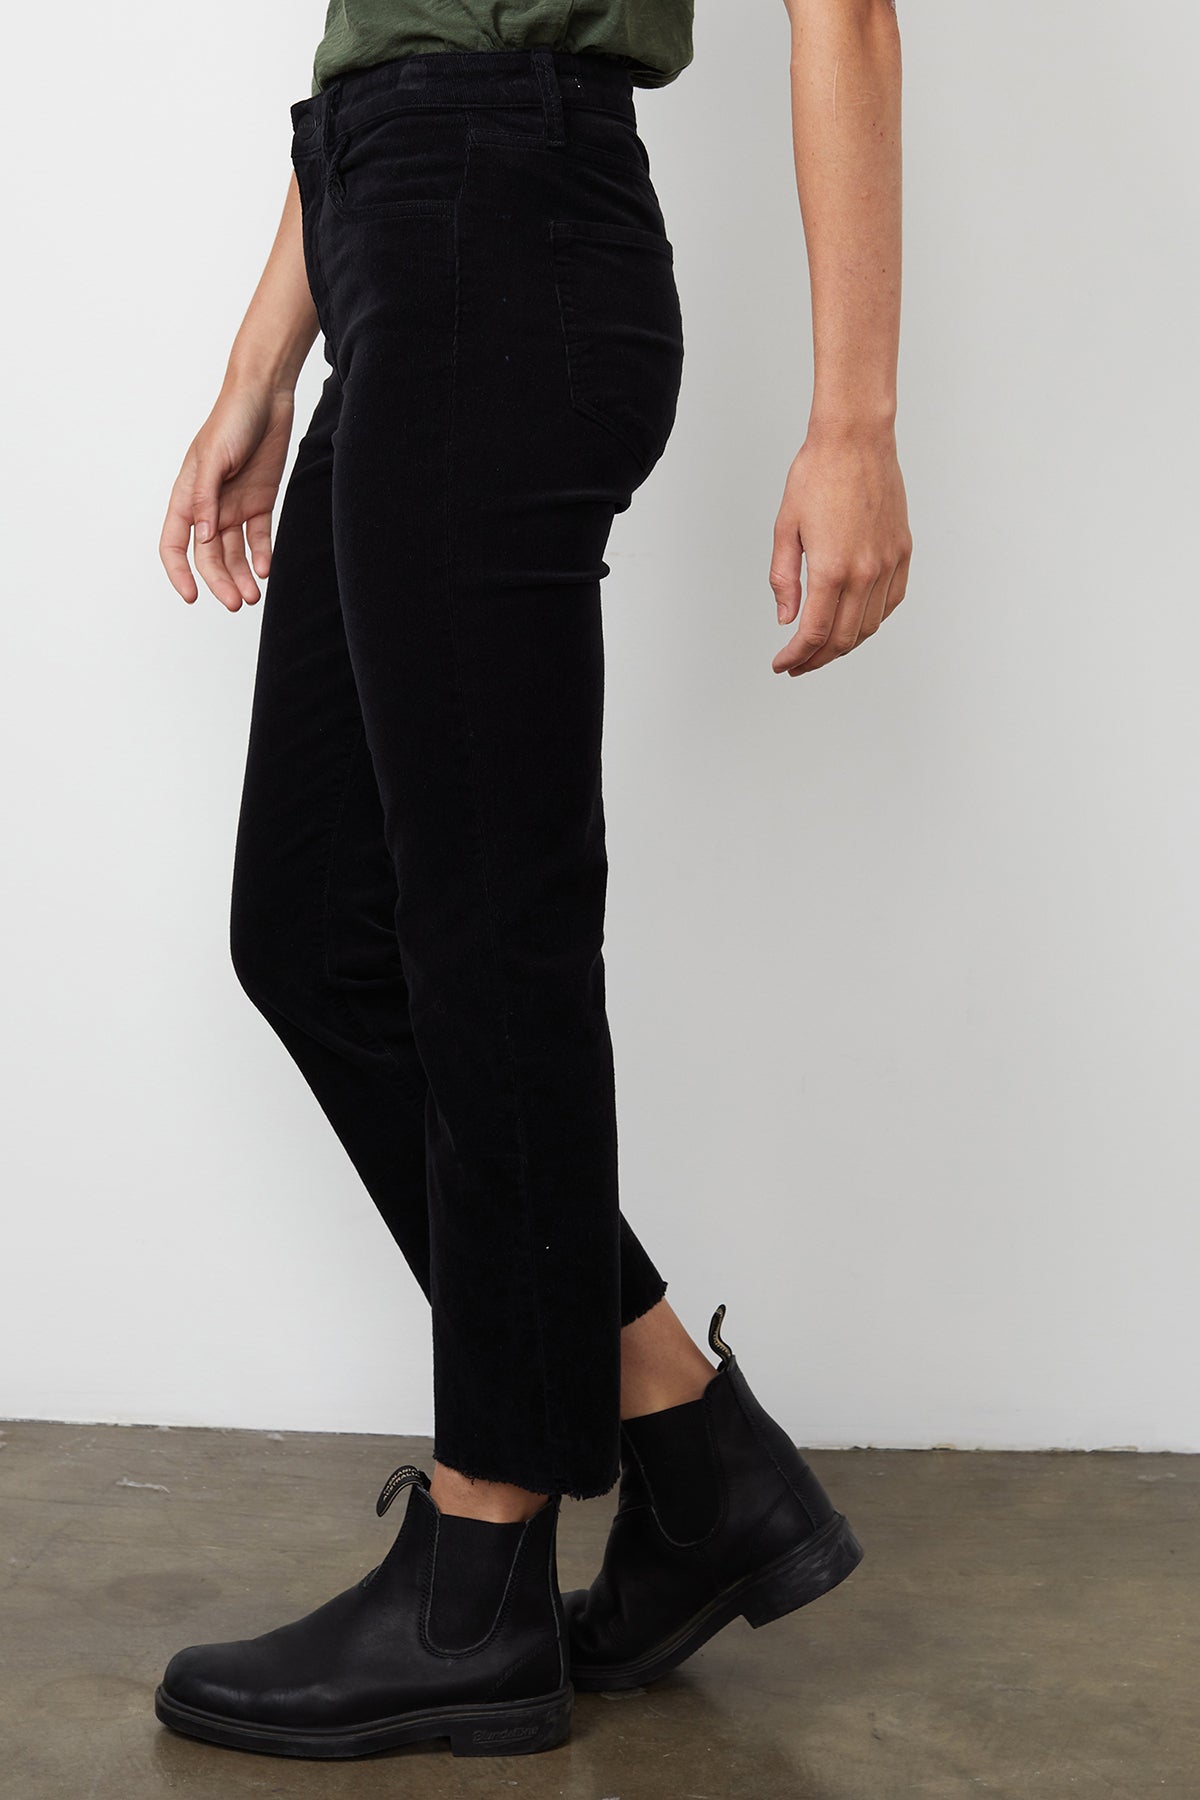 A woman wearing Velvet by Graham & Spencer's CANDACE CORDUROY HIGH RISE CROP JEAN in fall-inspired bottoms.-14889566240961